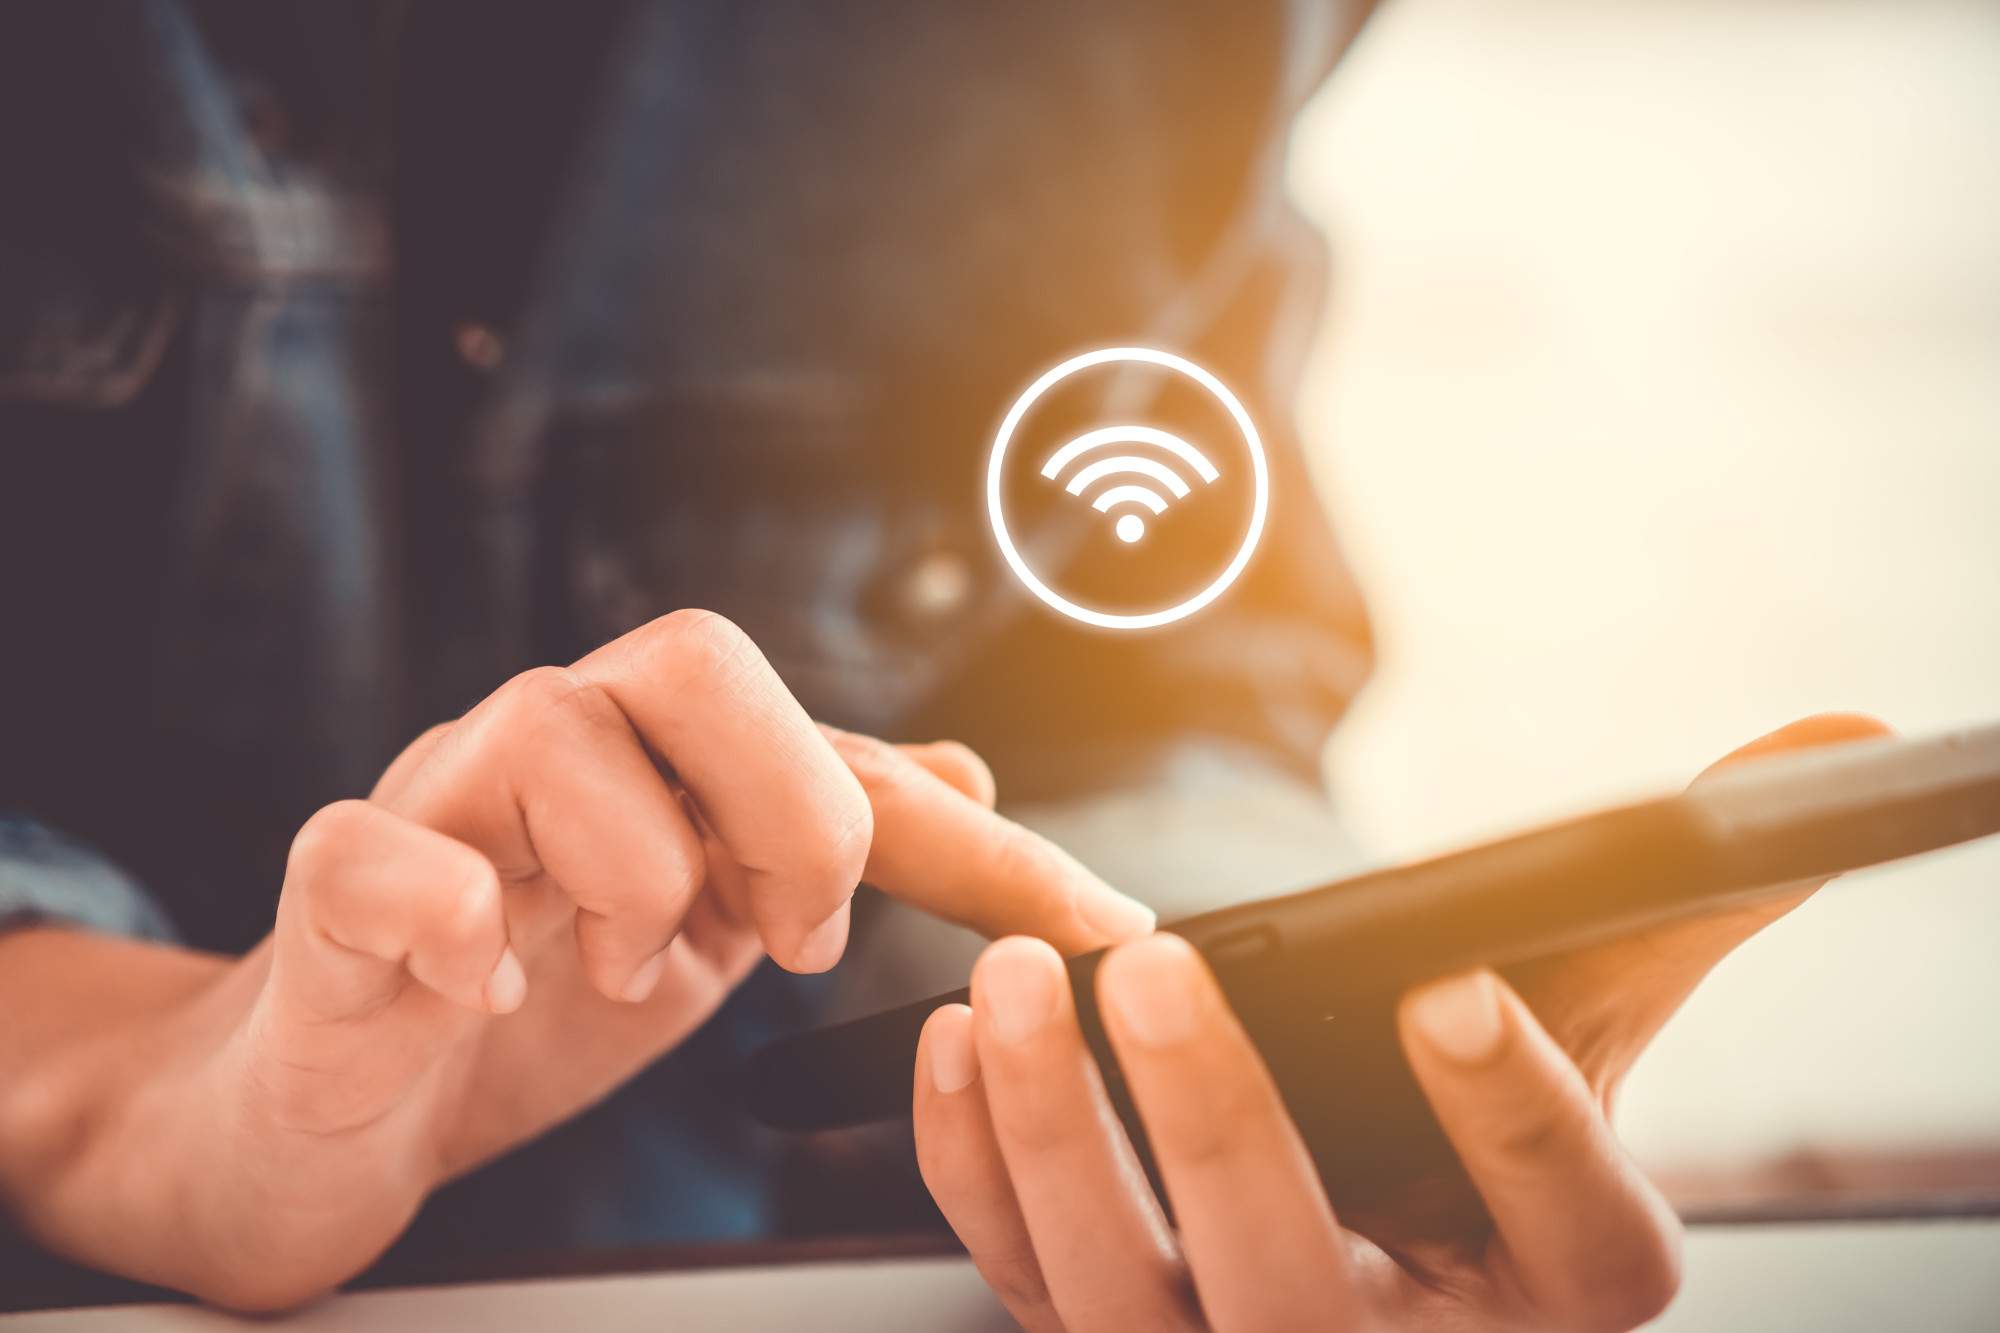 5 Common Wi-Fi Security Mistakes and How to Avoid Them